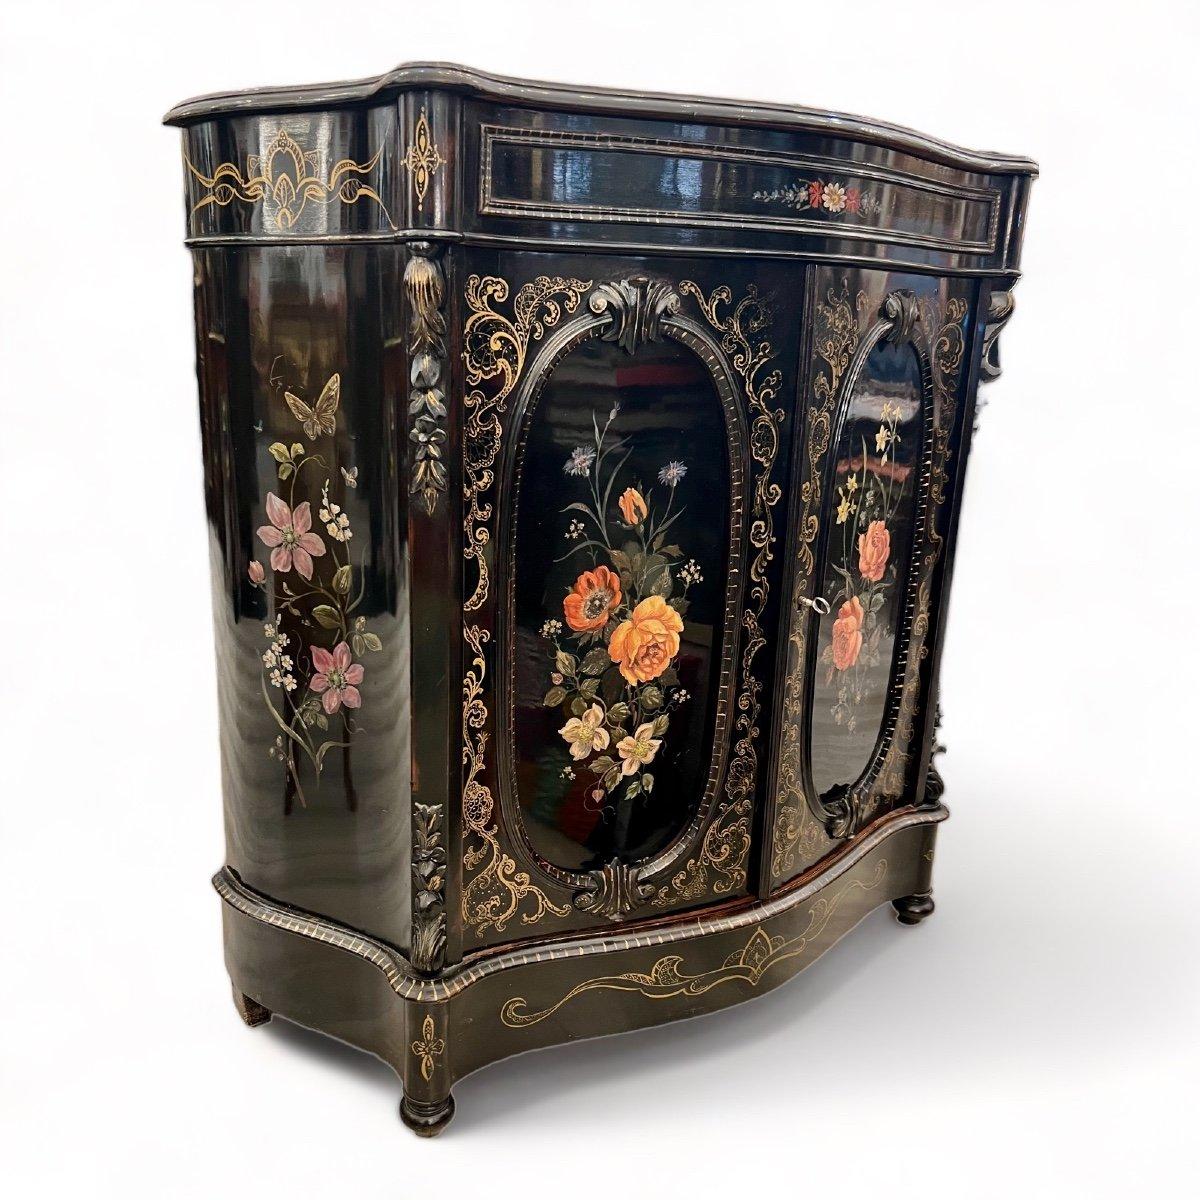 We present to you this unique 'meuble d'appui' buffet piece crafted from black lacquered wood. It features two prominent cartouches of bouquets painted on its sinuous front, which, in turn, opens with two doors and one drawer. Rich gold accents also